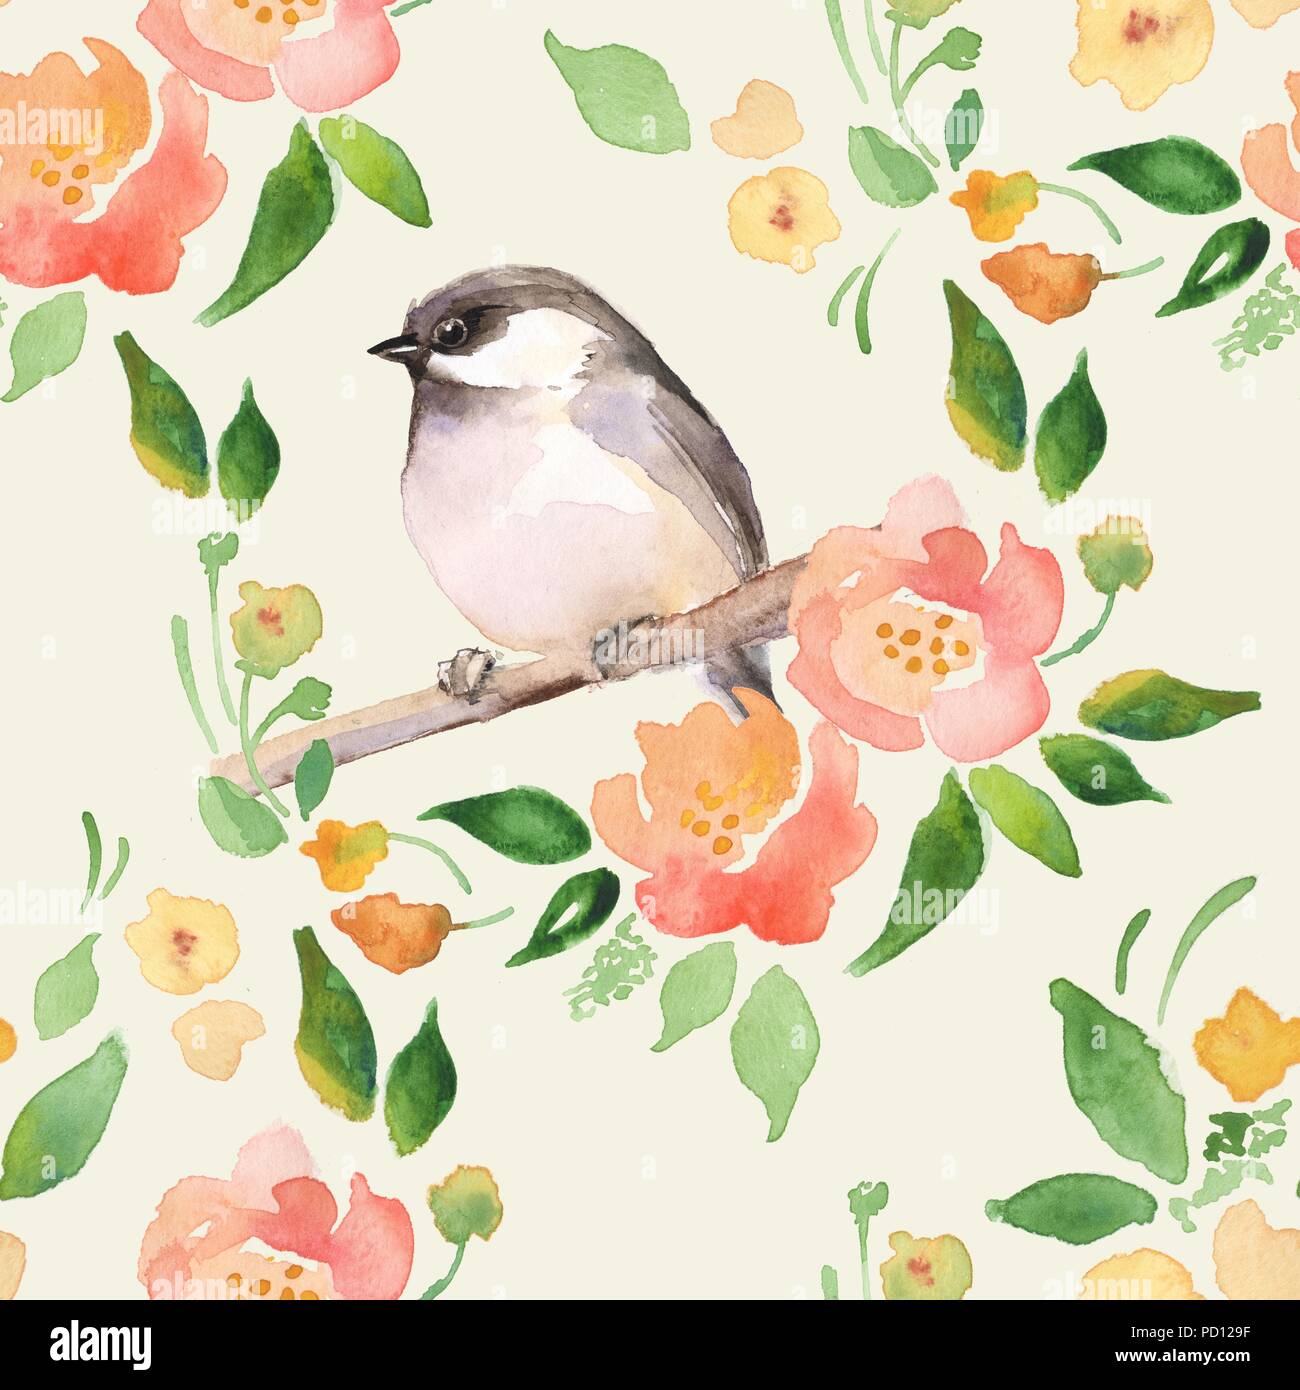 Watercolor floral background with a cute bird. Seamless  pattern 10 Stock Photo